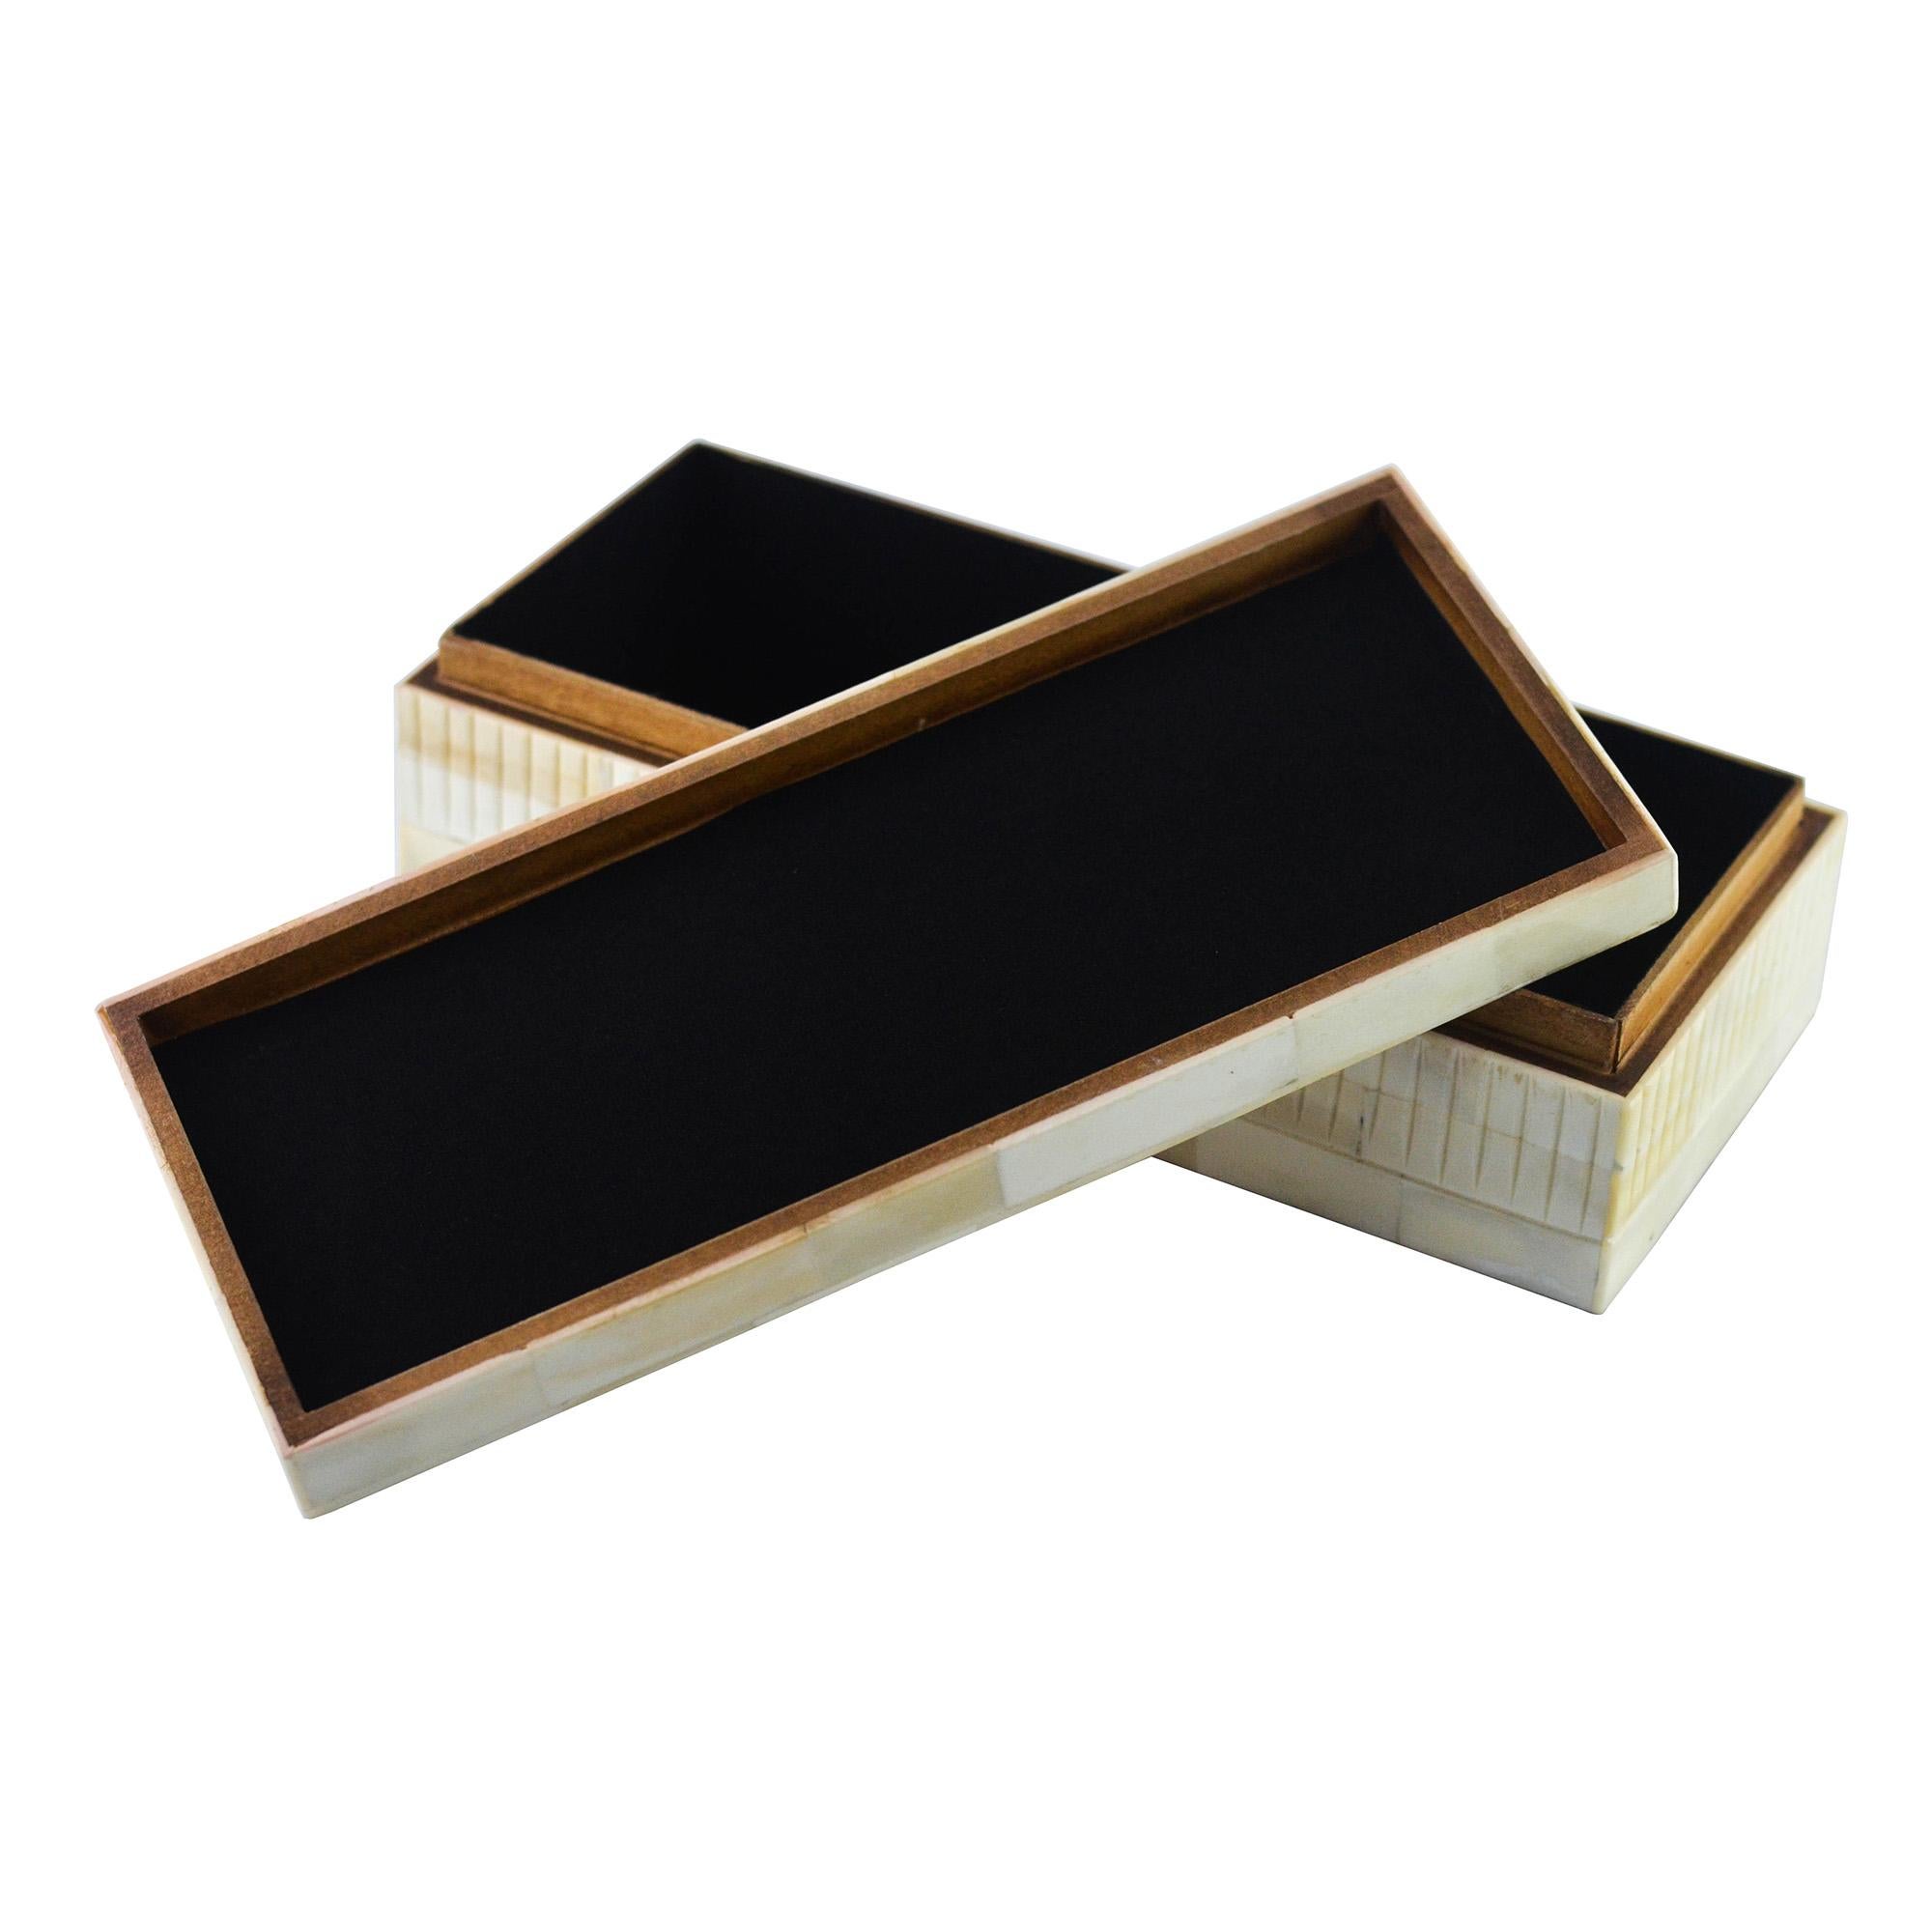 Modern Laveen Box in Natural Bone by CuratedKravet